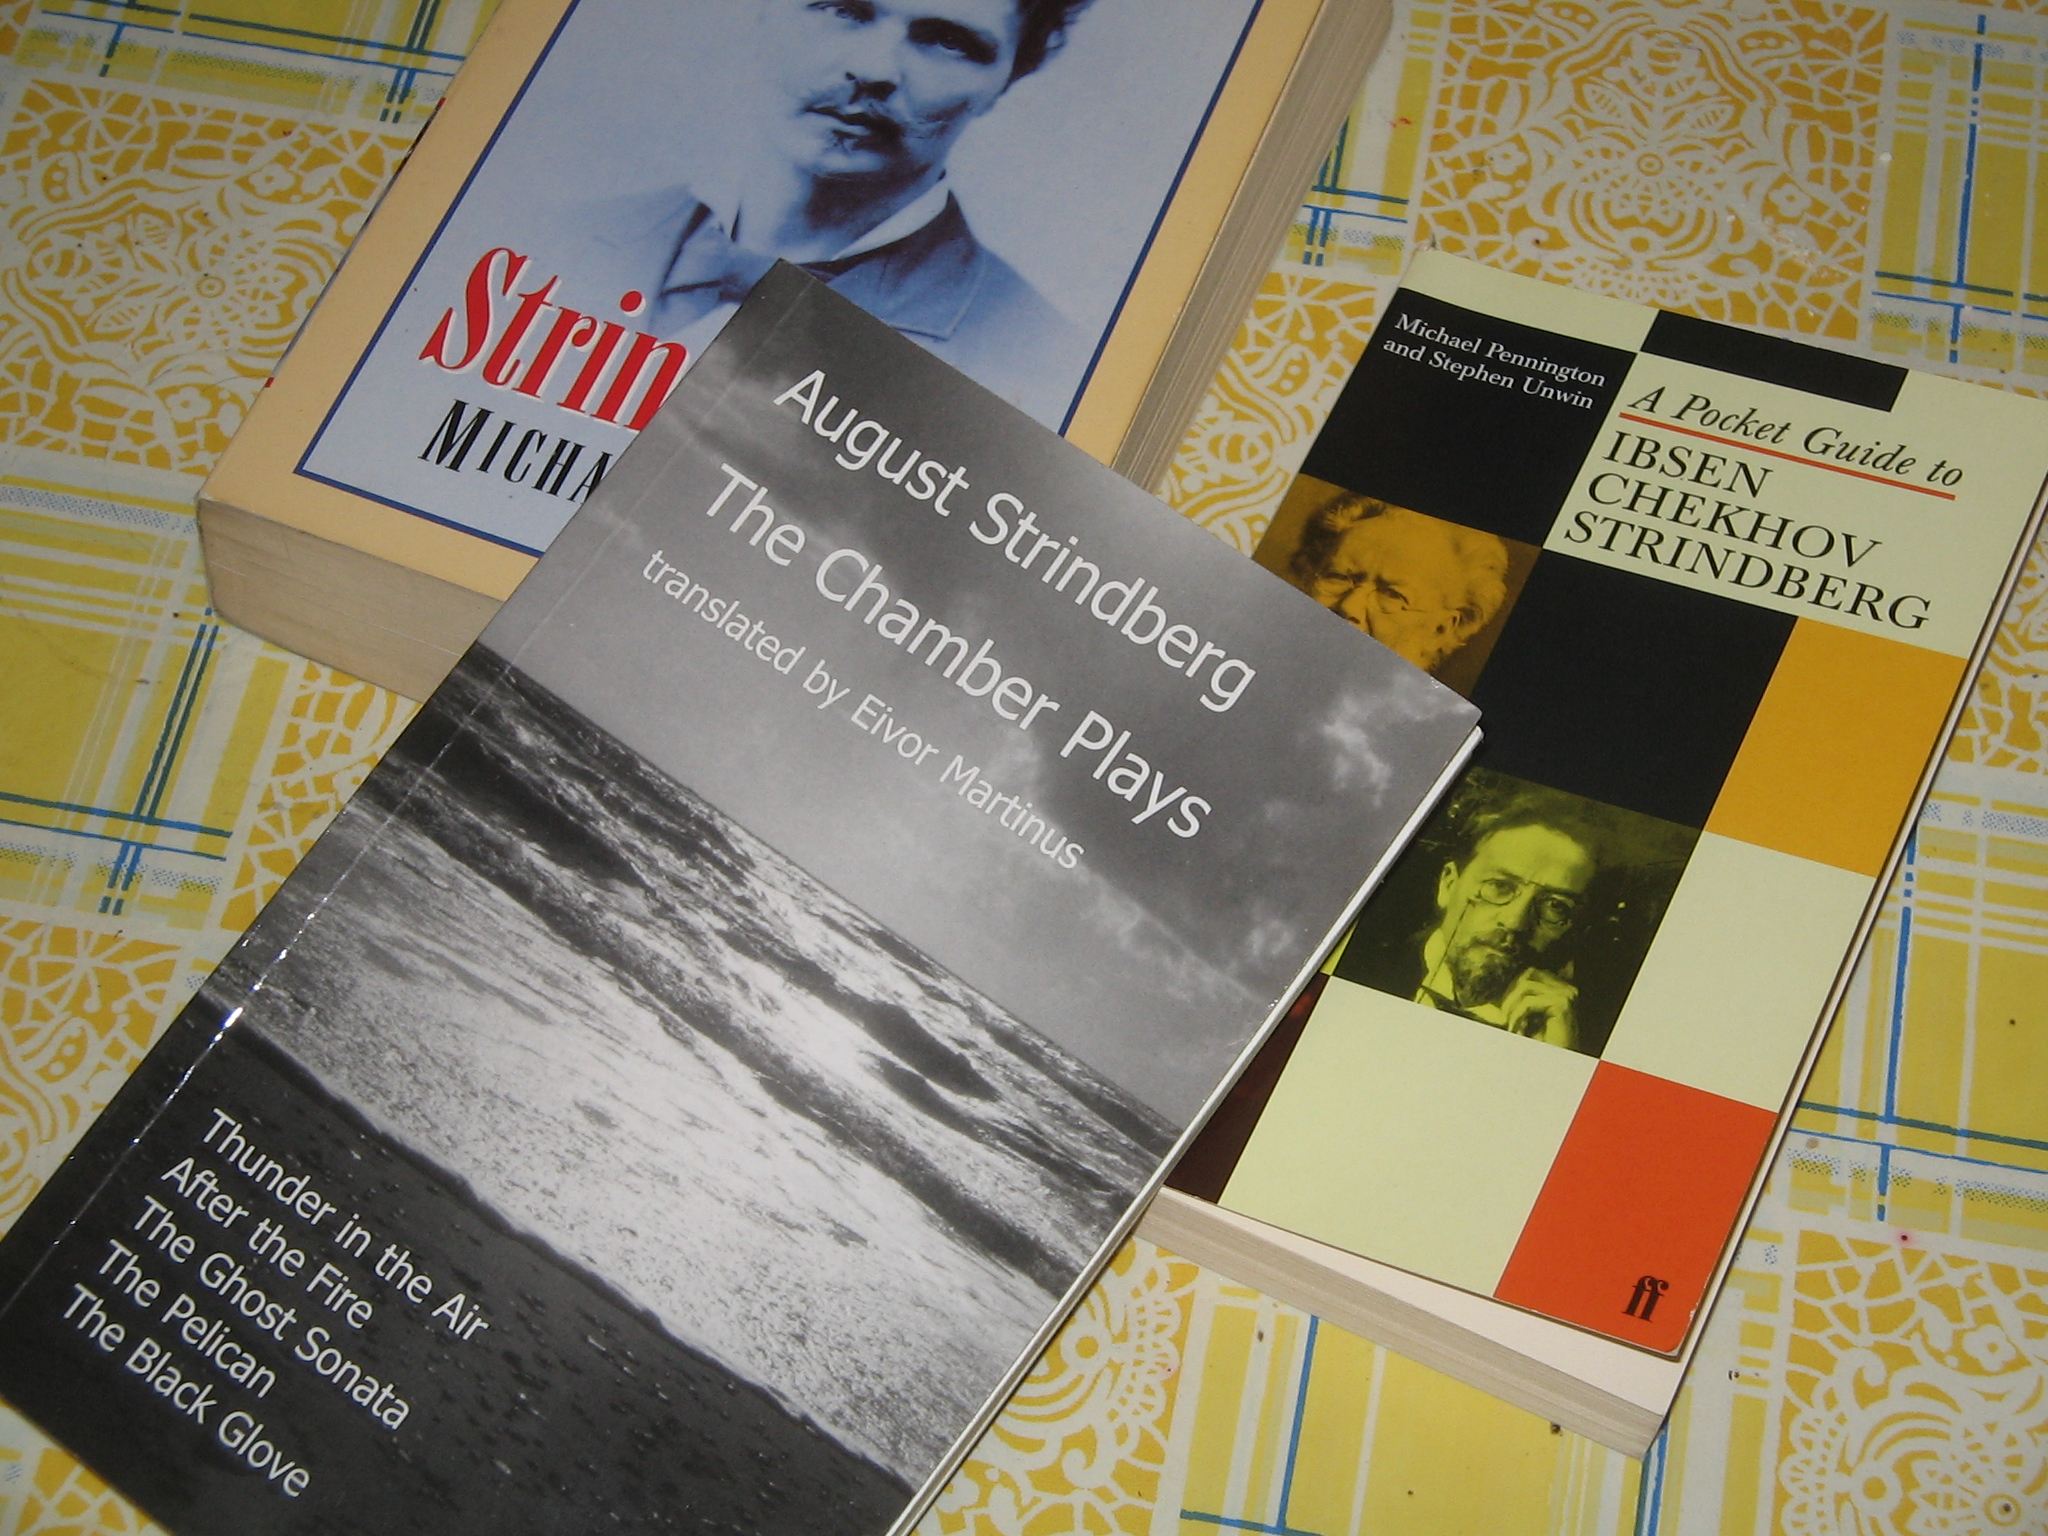 A Pocket Guide to Ibsen Chekhov and Strindberg